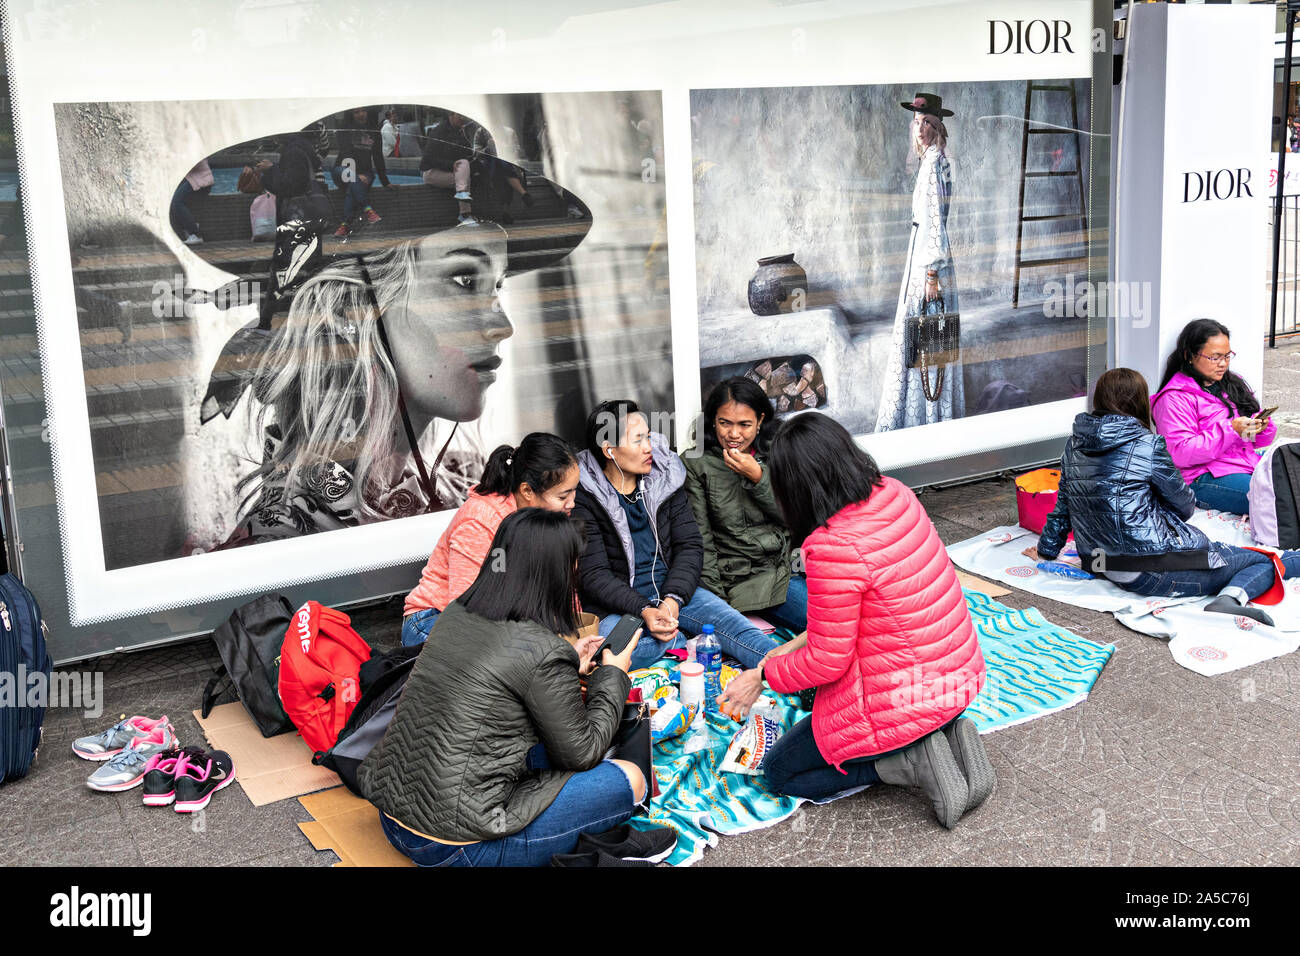 Filipino domestic workers gather on their day-off in front of fashion advertisements in Central District, Hong Kong. Approximately 130,000 Filipino domestic servants work in Hong Kong and all have Sundays off. Stock Photo